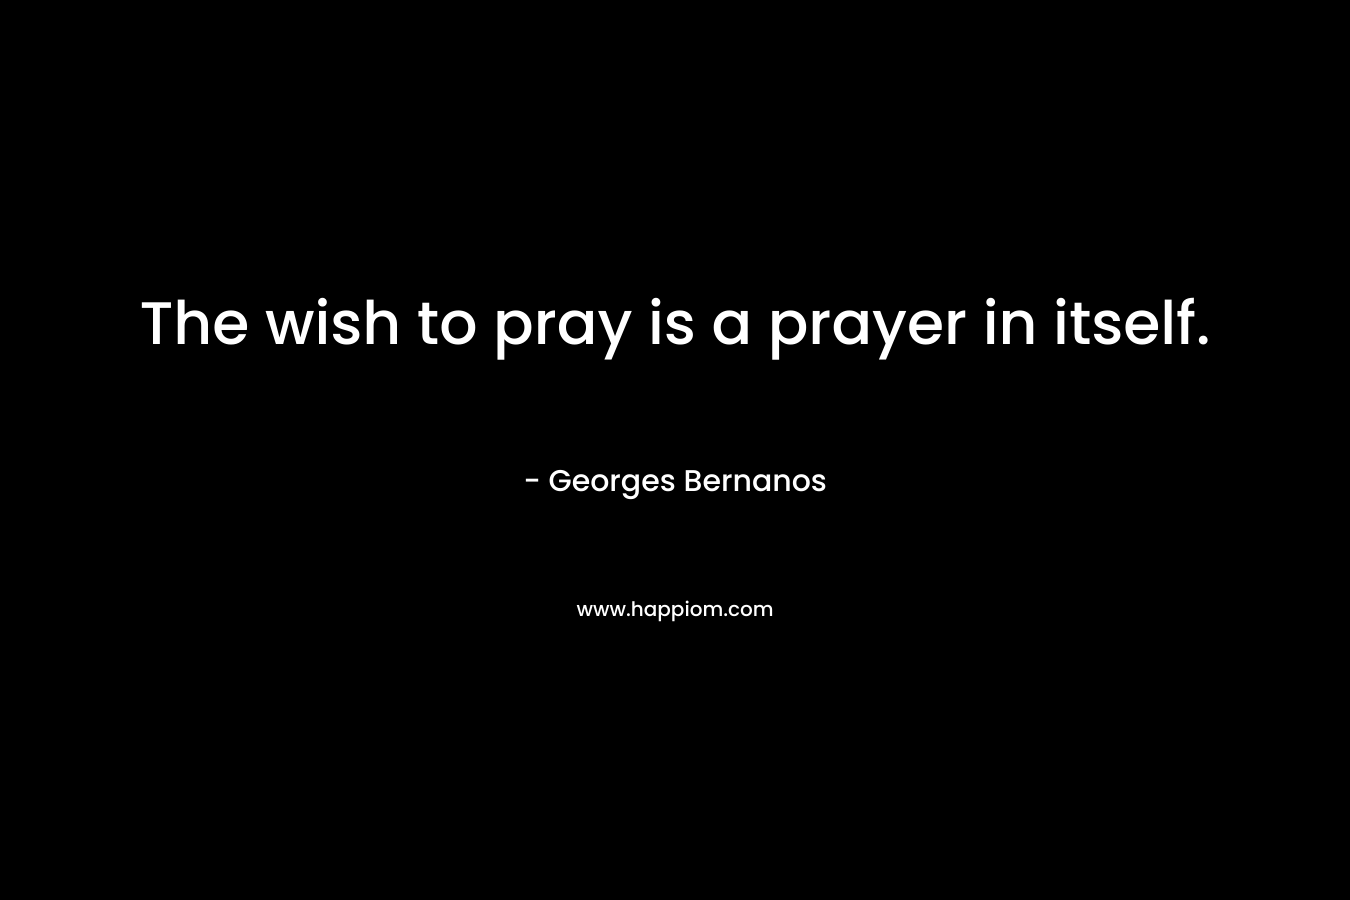 The wish to pray is a prayer in itself.